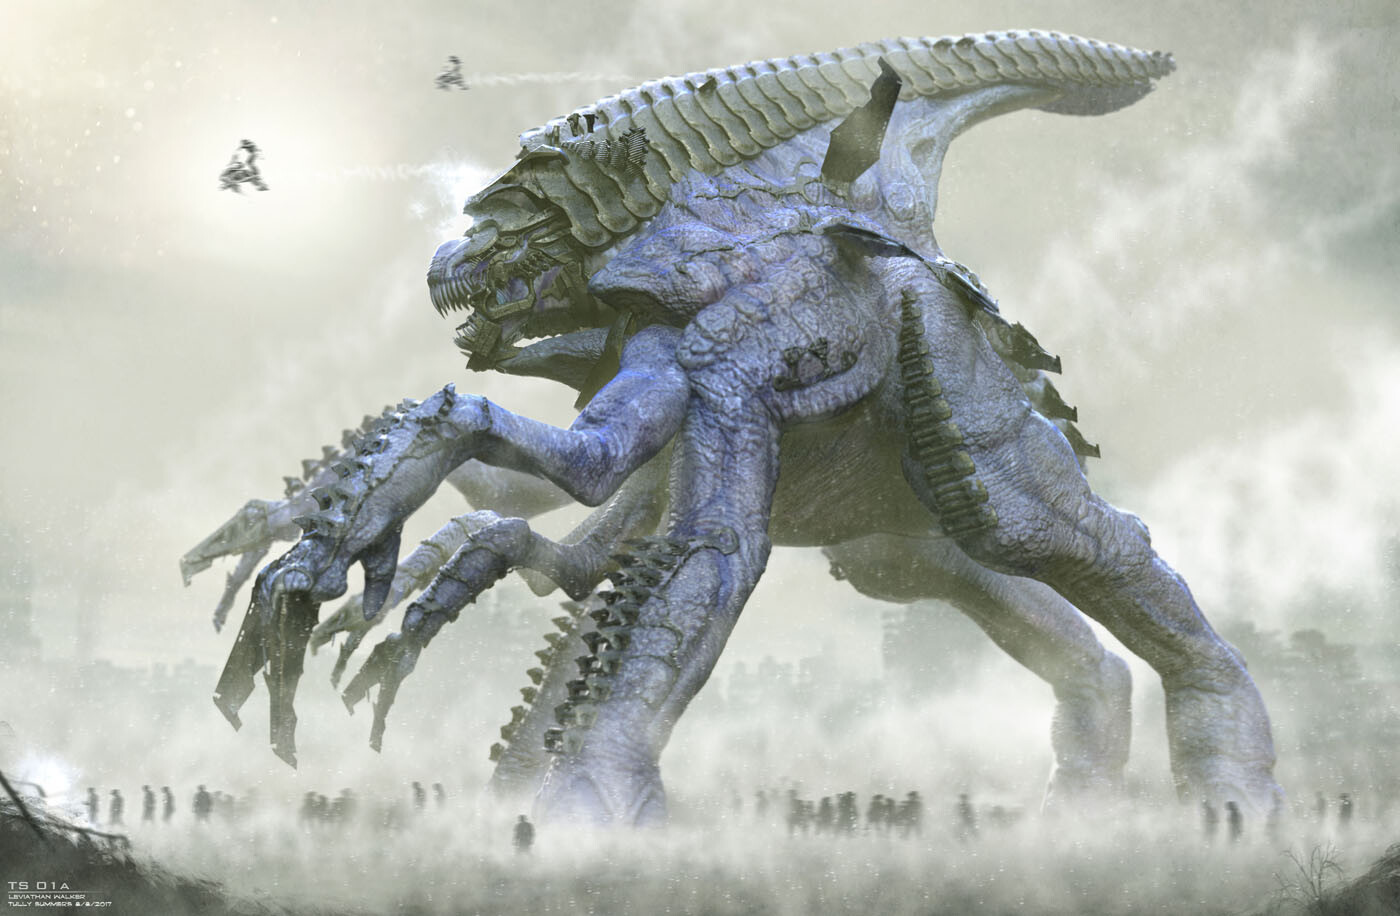 Quadruped version.  Note the Chitauri soldiers marching near it's feet.